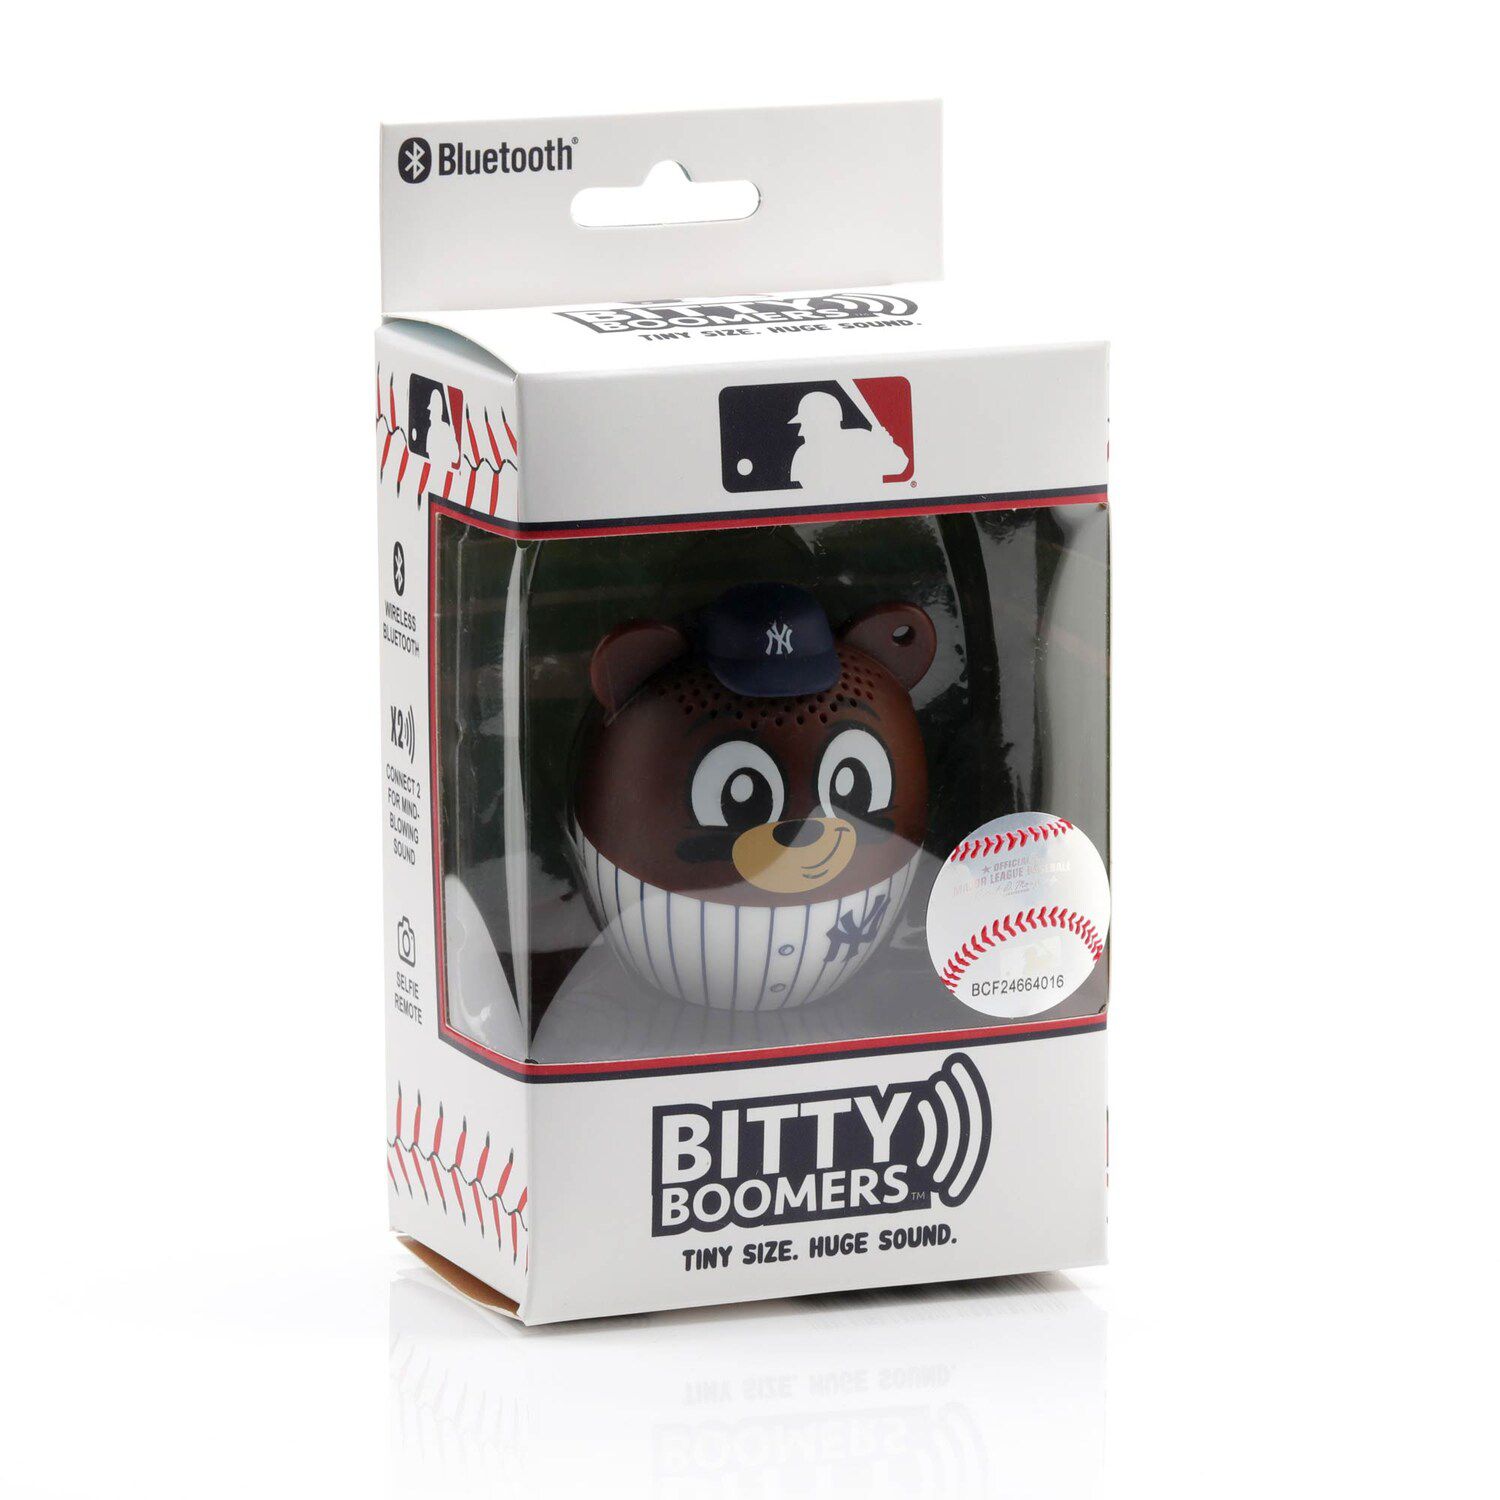 Image for Unbranded New York Yankees Bitty Boomer Bluetooth Speaker at Kohl's.